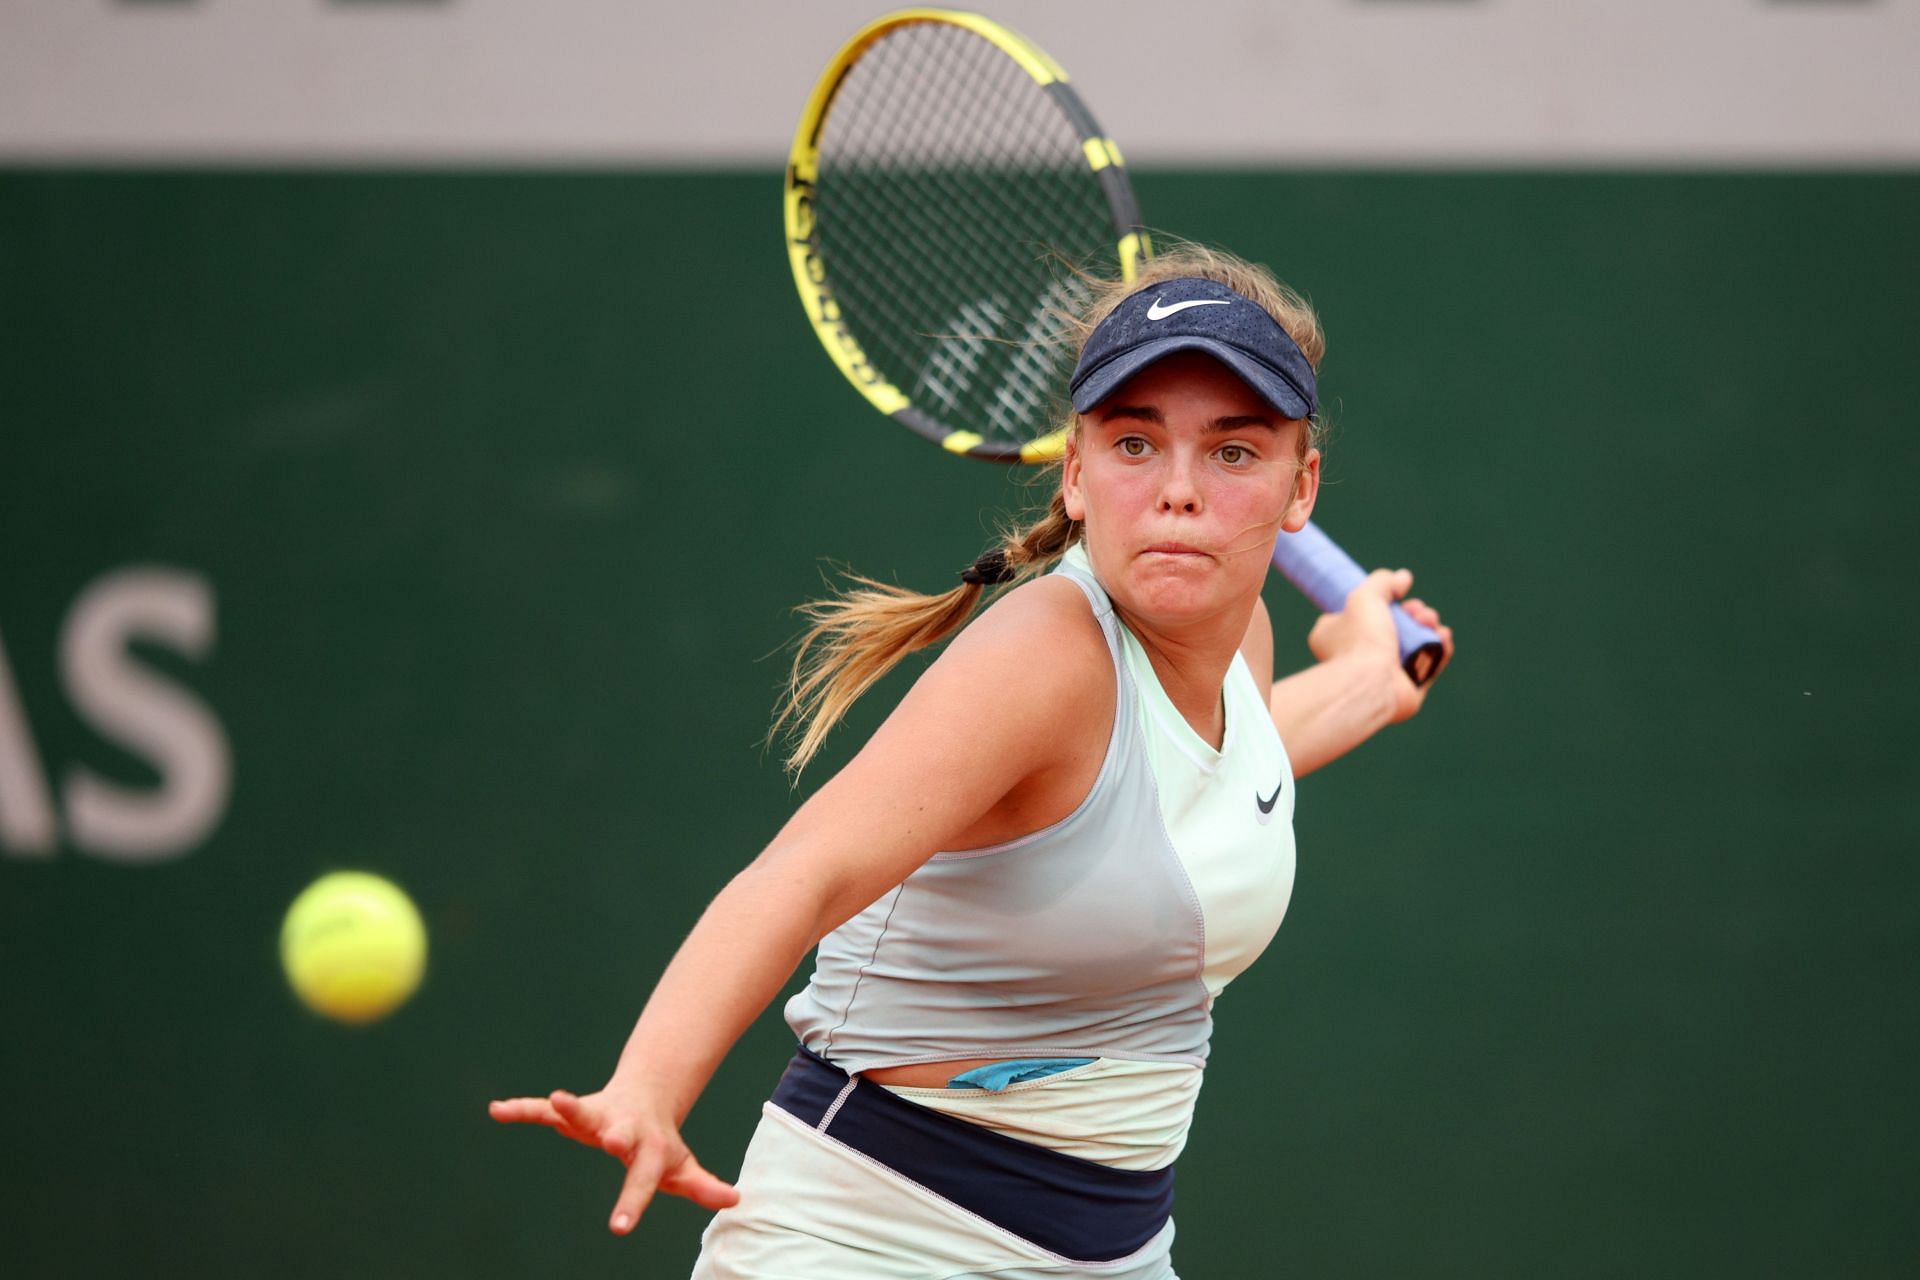 Sara Bejlek in action at the 2022 French Open.